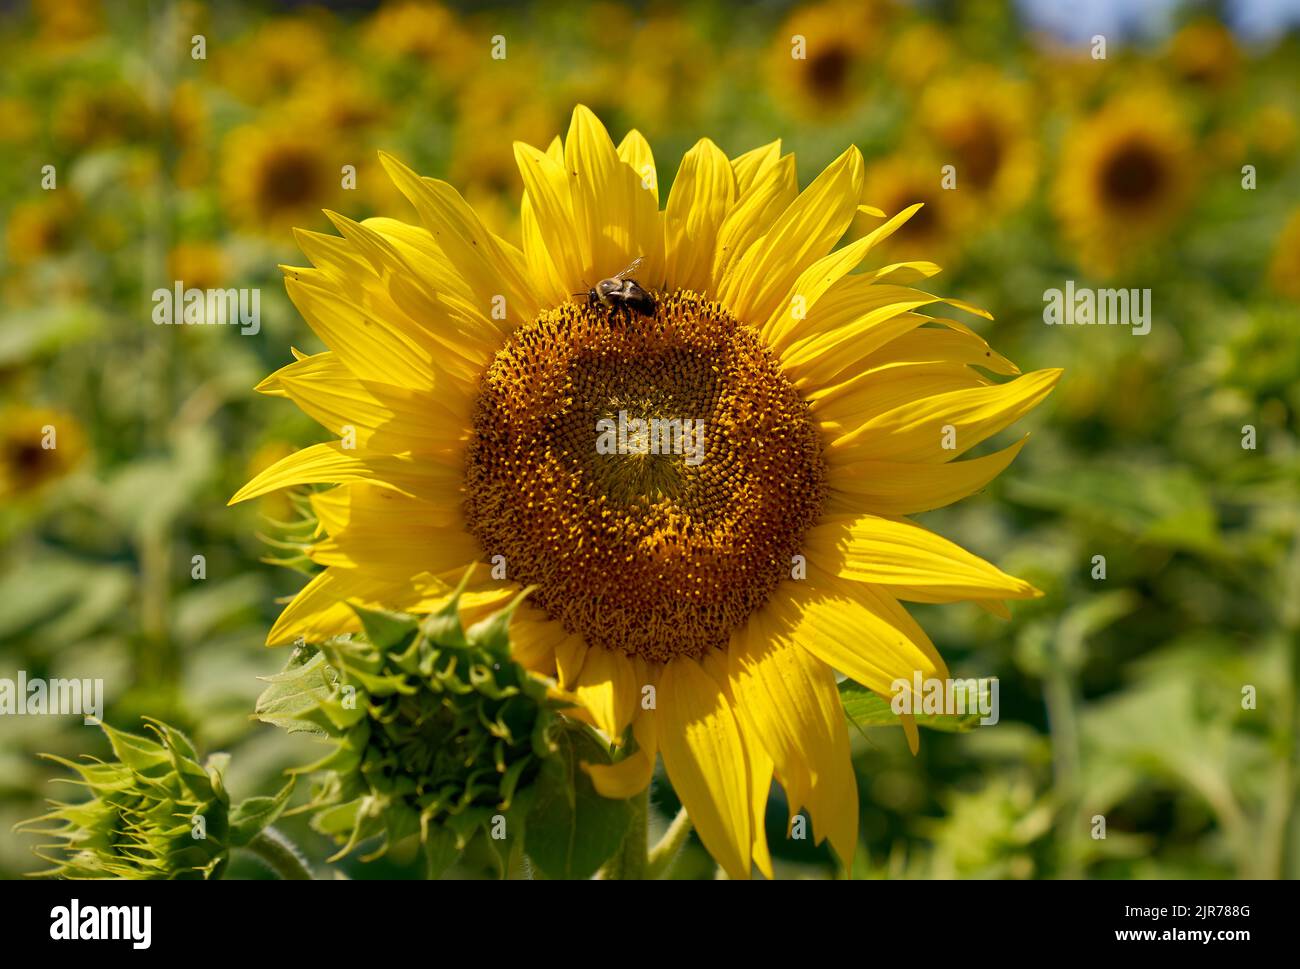 Summer Sunflower Field and Bumblebee. A Sunflower plant with a Bumblebee on a farm field. Stock Photo